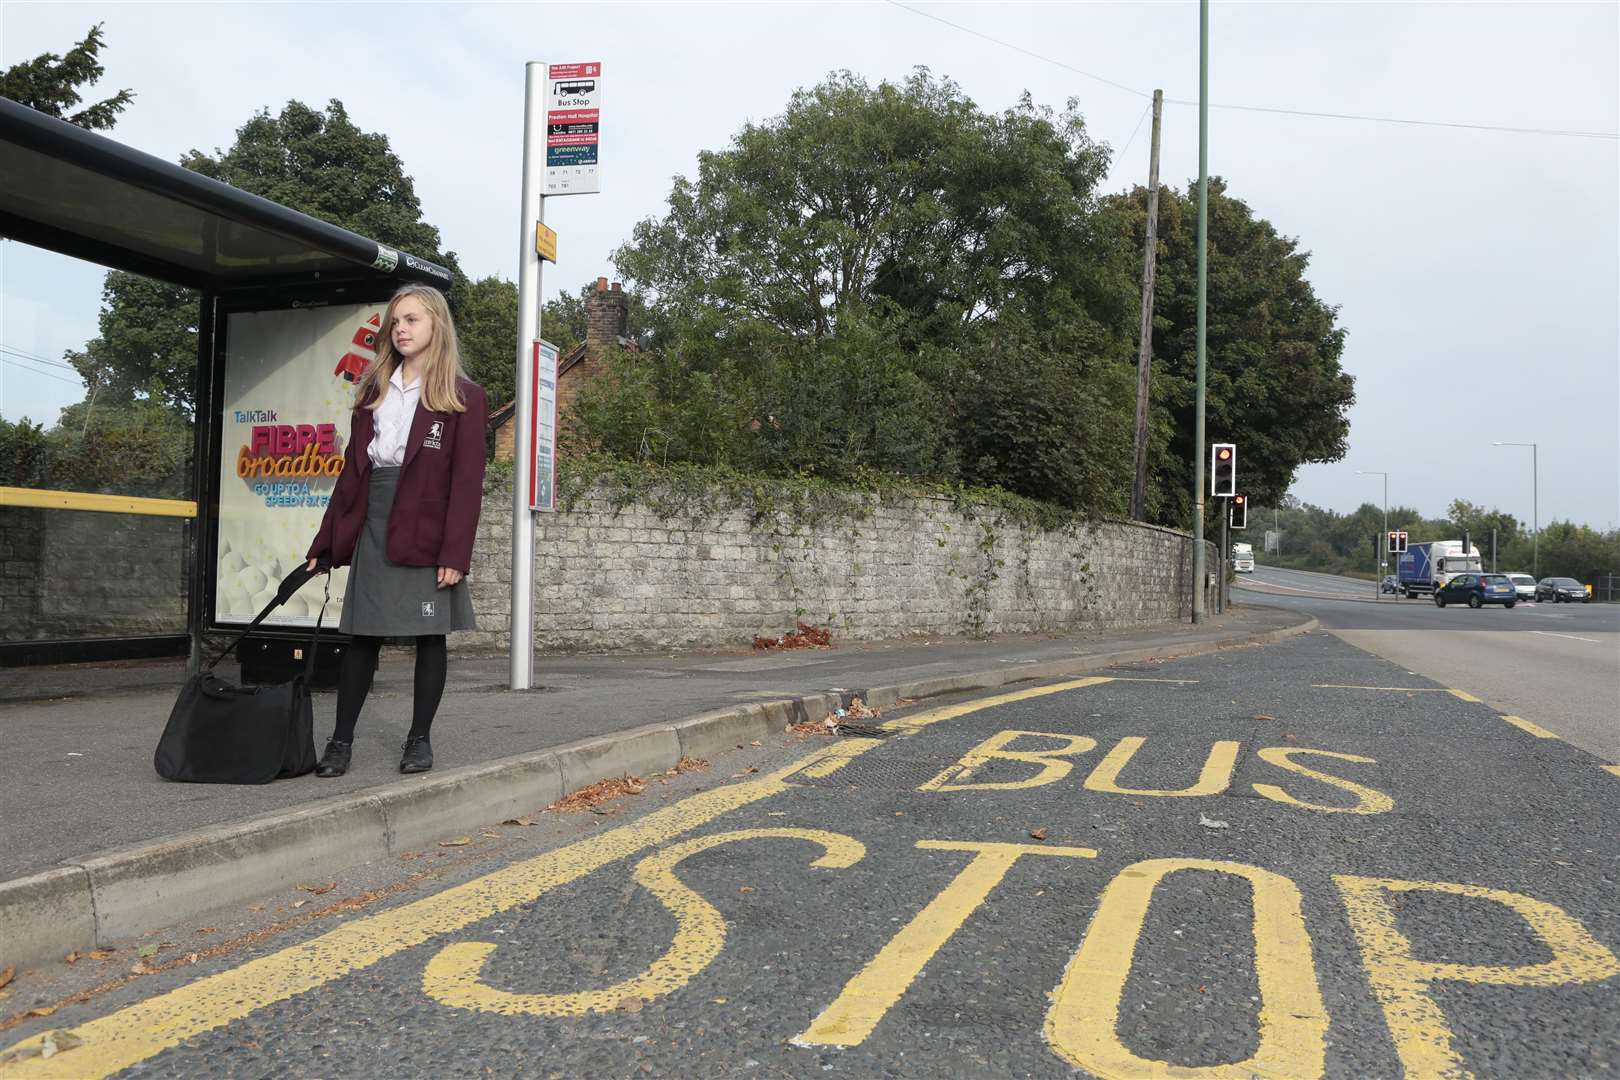 The cost of bus fares for children is once again under the spotlight